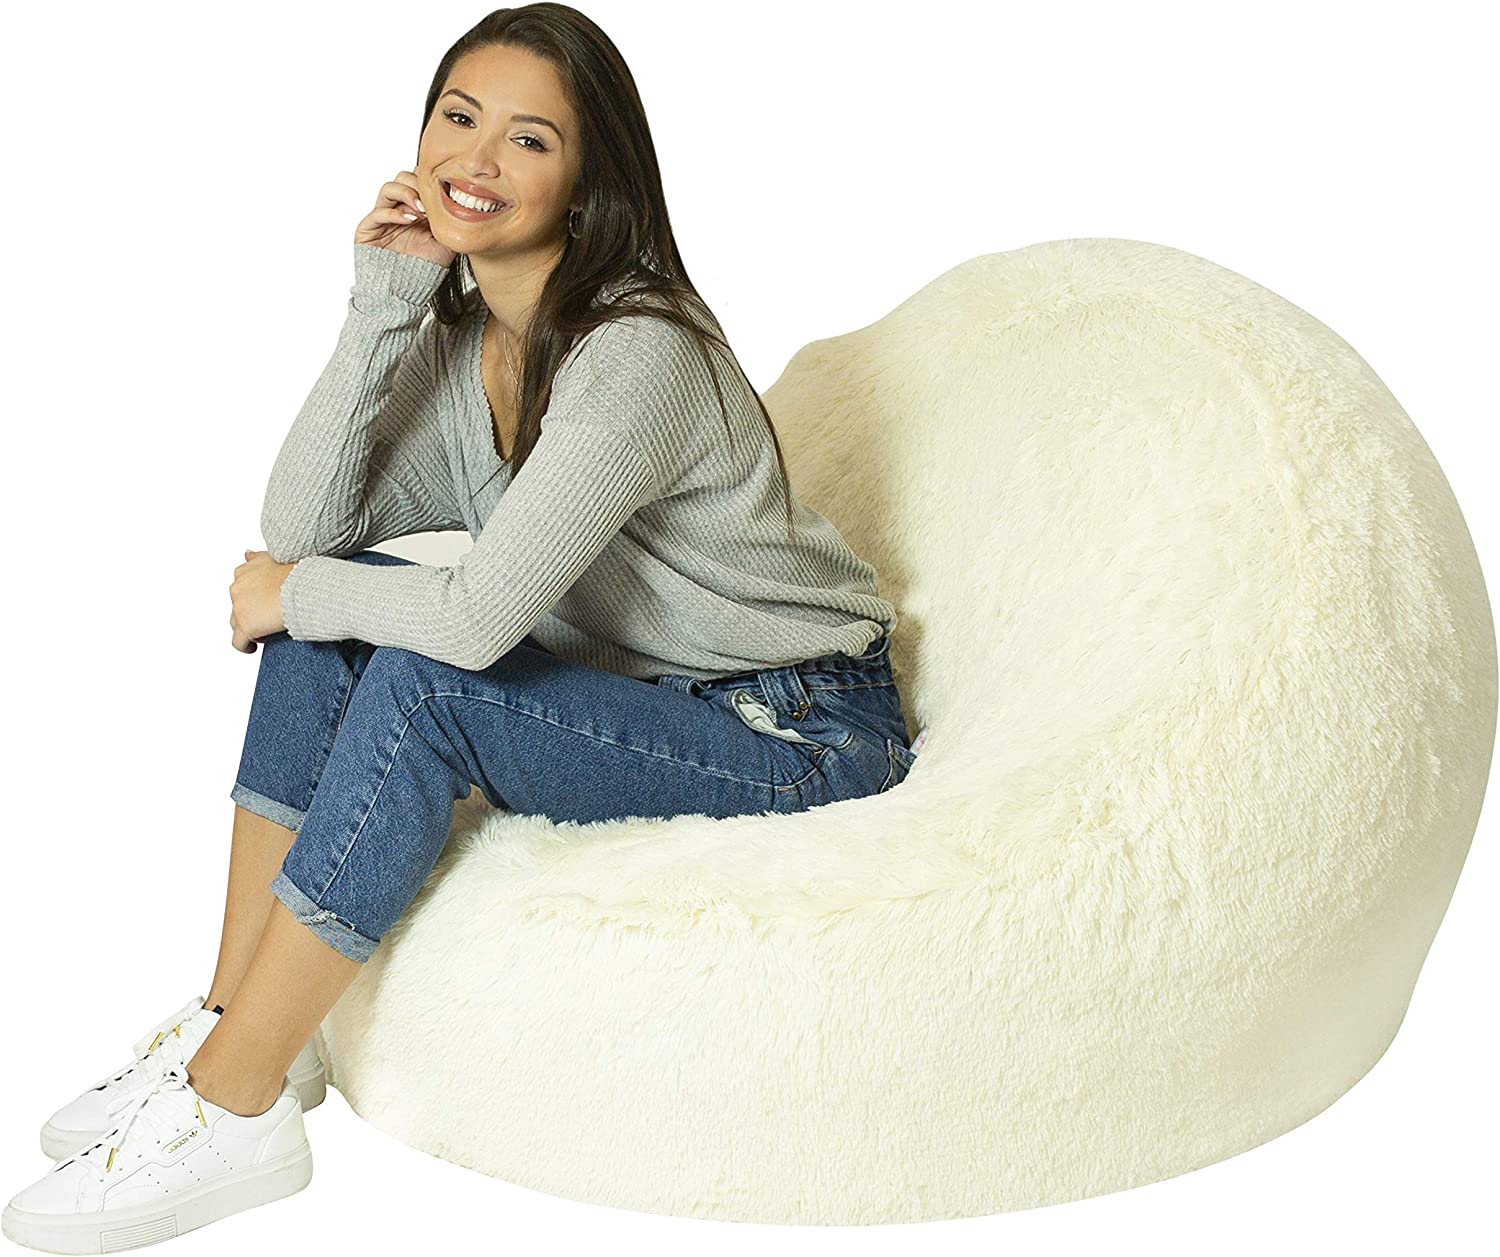 White Inflatable Chair, Premium Quality, Softer, Fluffier Fur, Contemporary Accent Chair for Bedroom, Dorm, Living Room, Gaming, Removable and Washable Fur Cover - KAMO